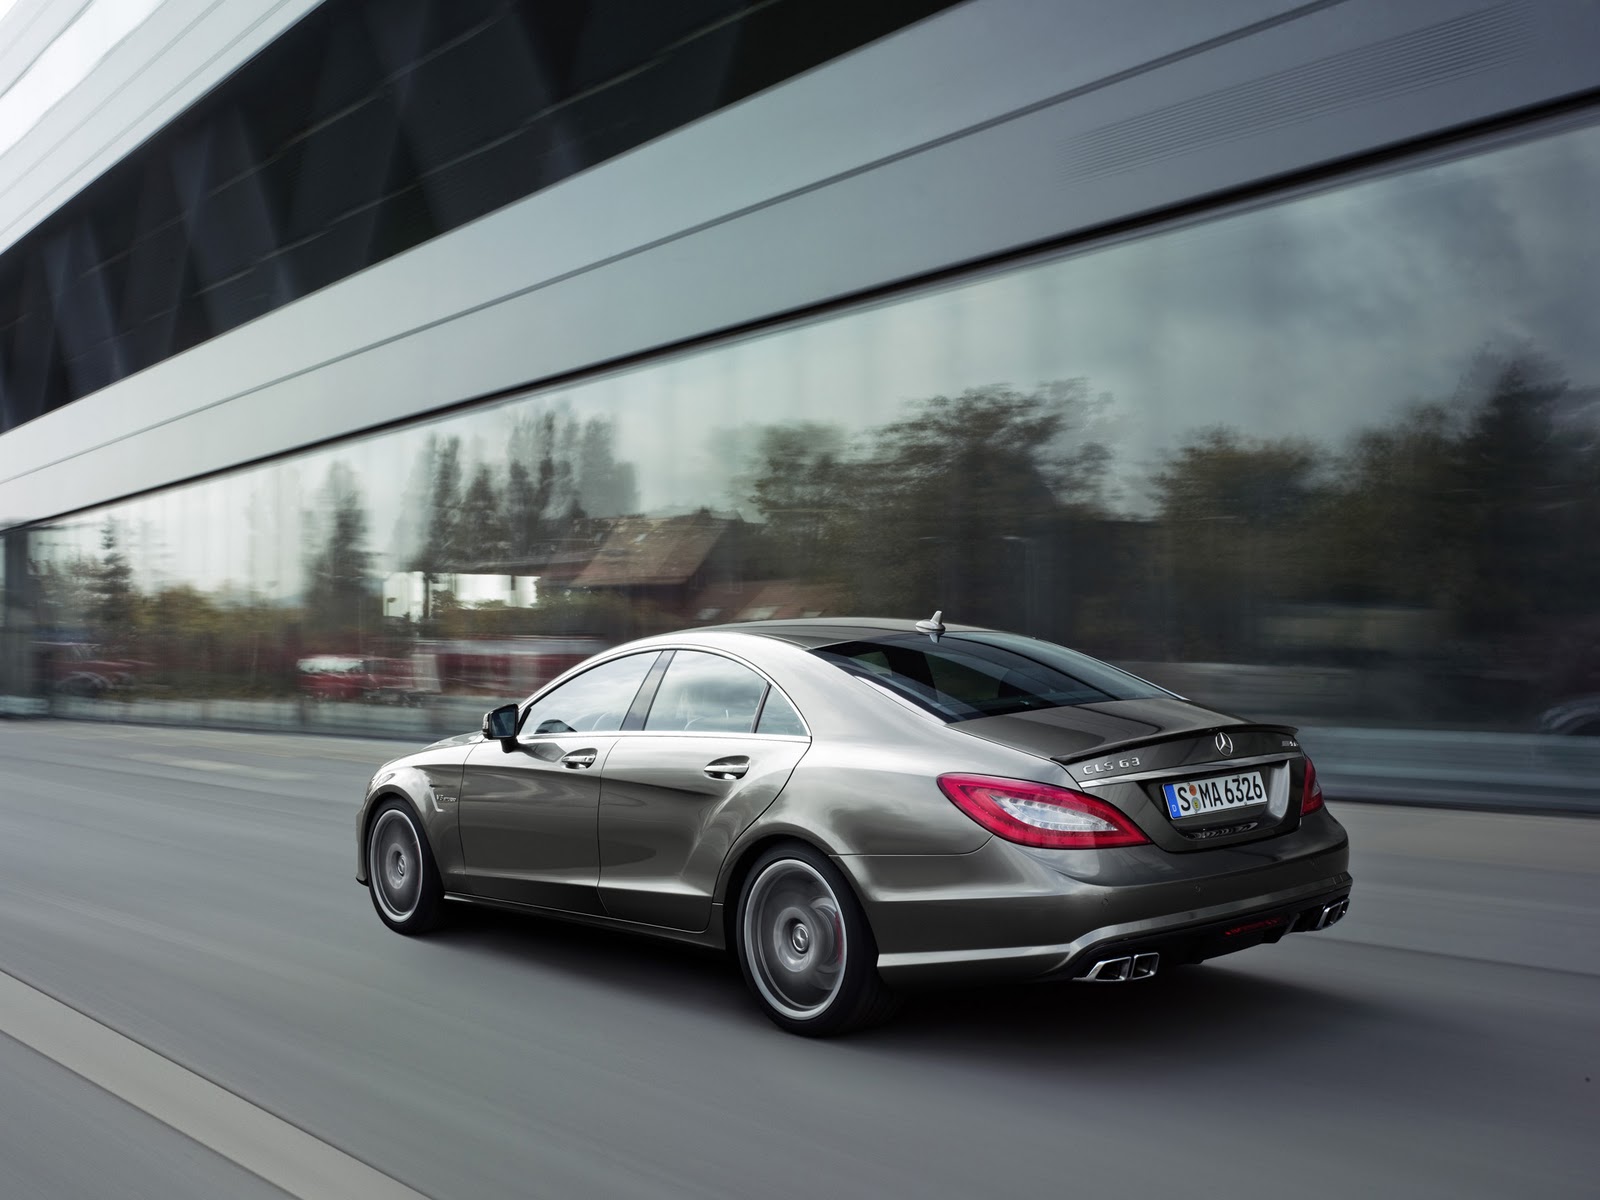 Mercedes-Benz CLS 63 AMG Coupe